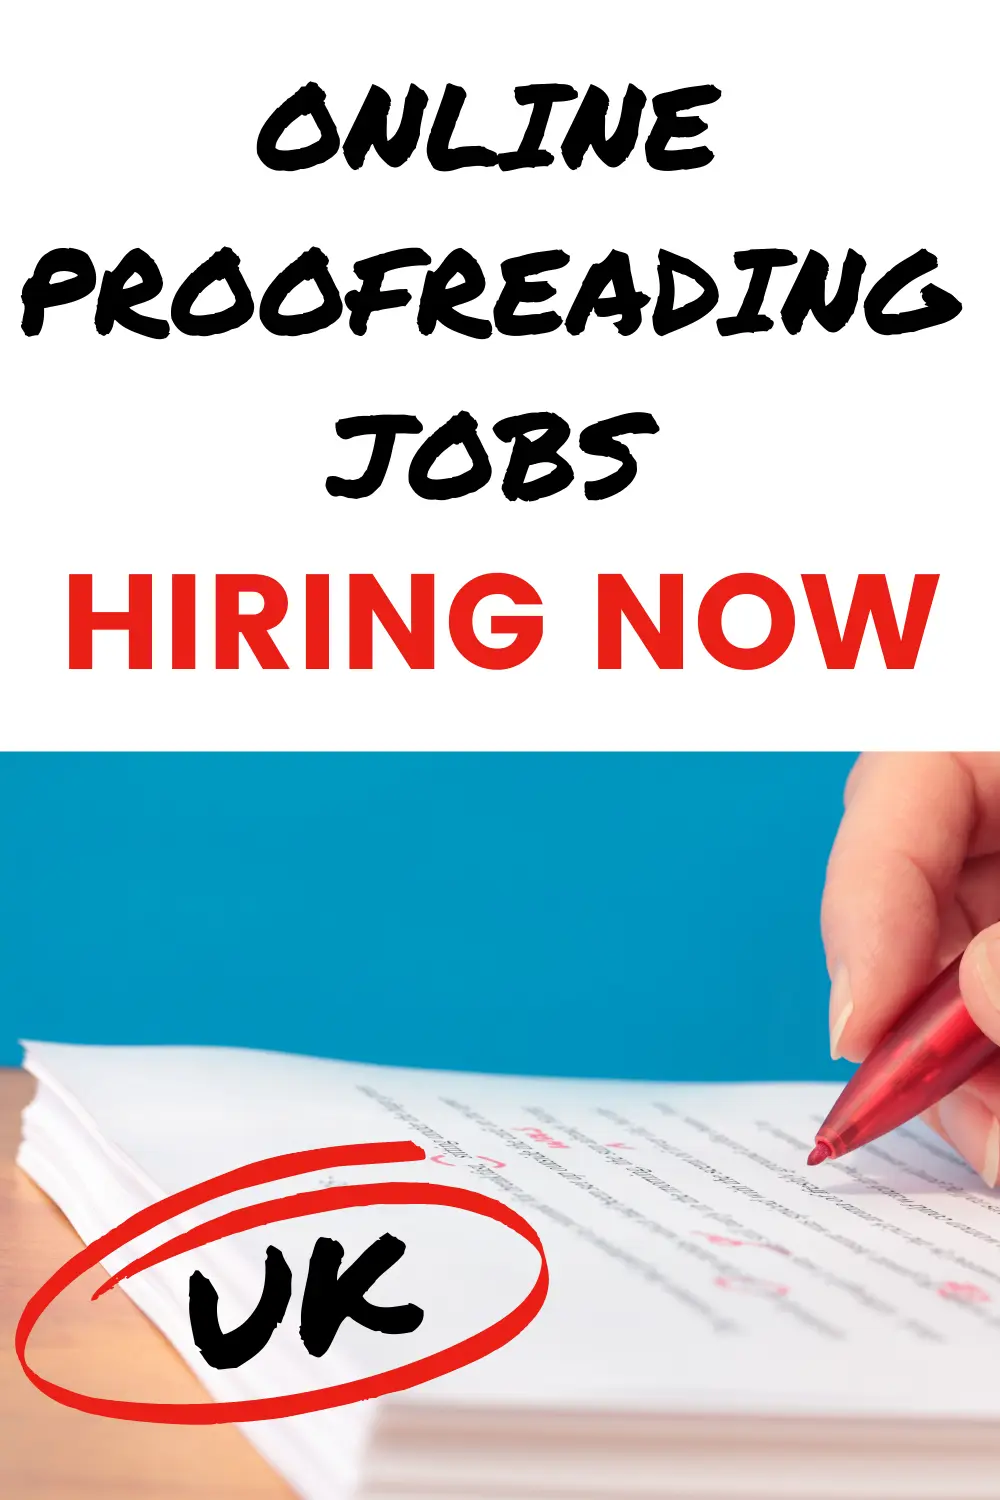 Pinterest image with text overlay: online proofreading jobs hiring now UK. Image of person proofreading printed text with red pen on a blue background.